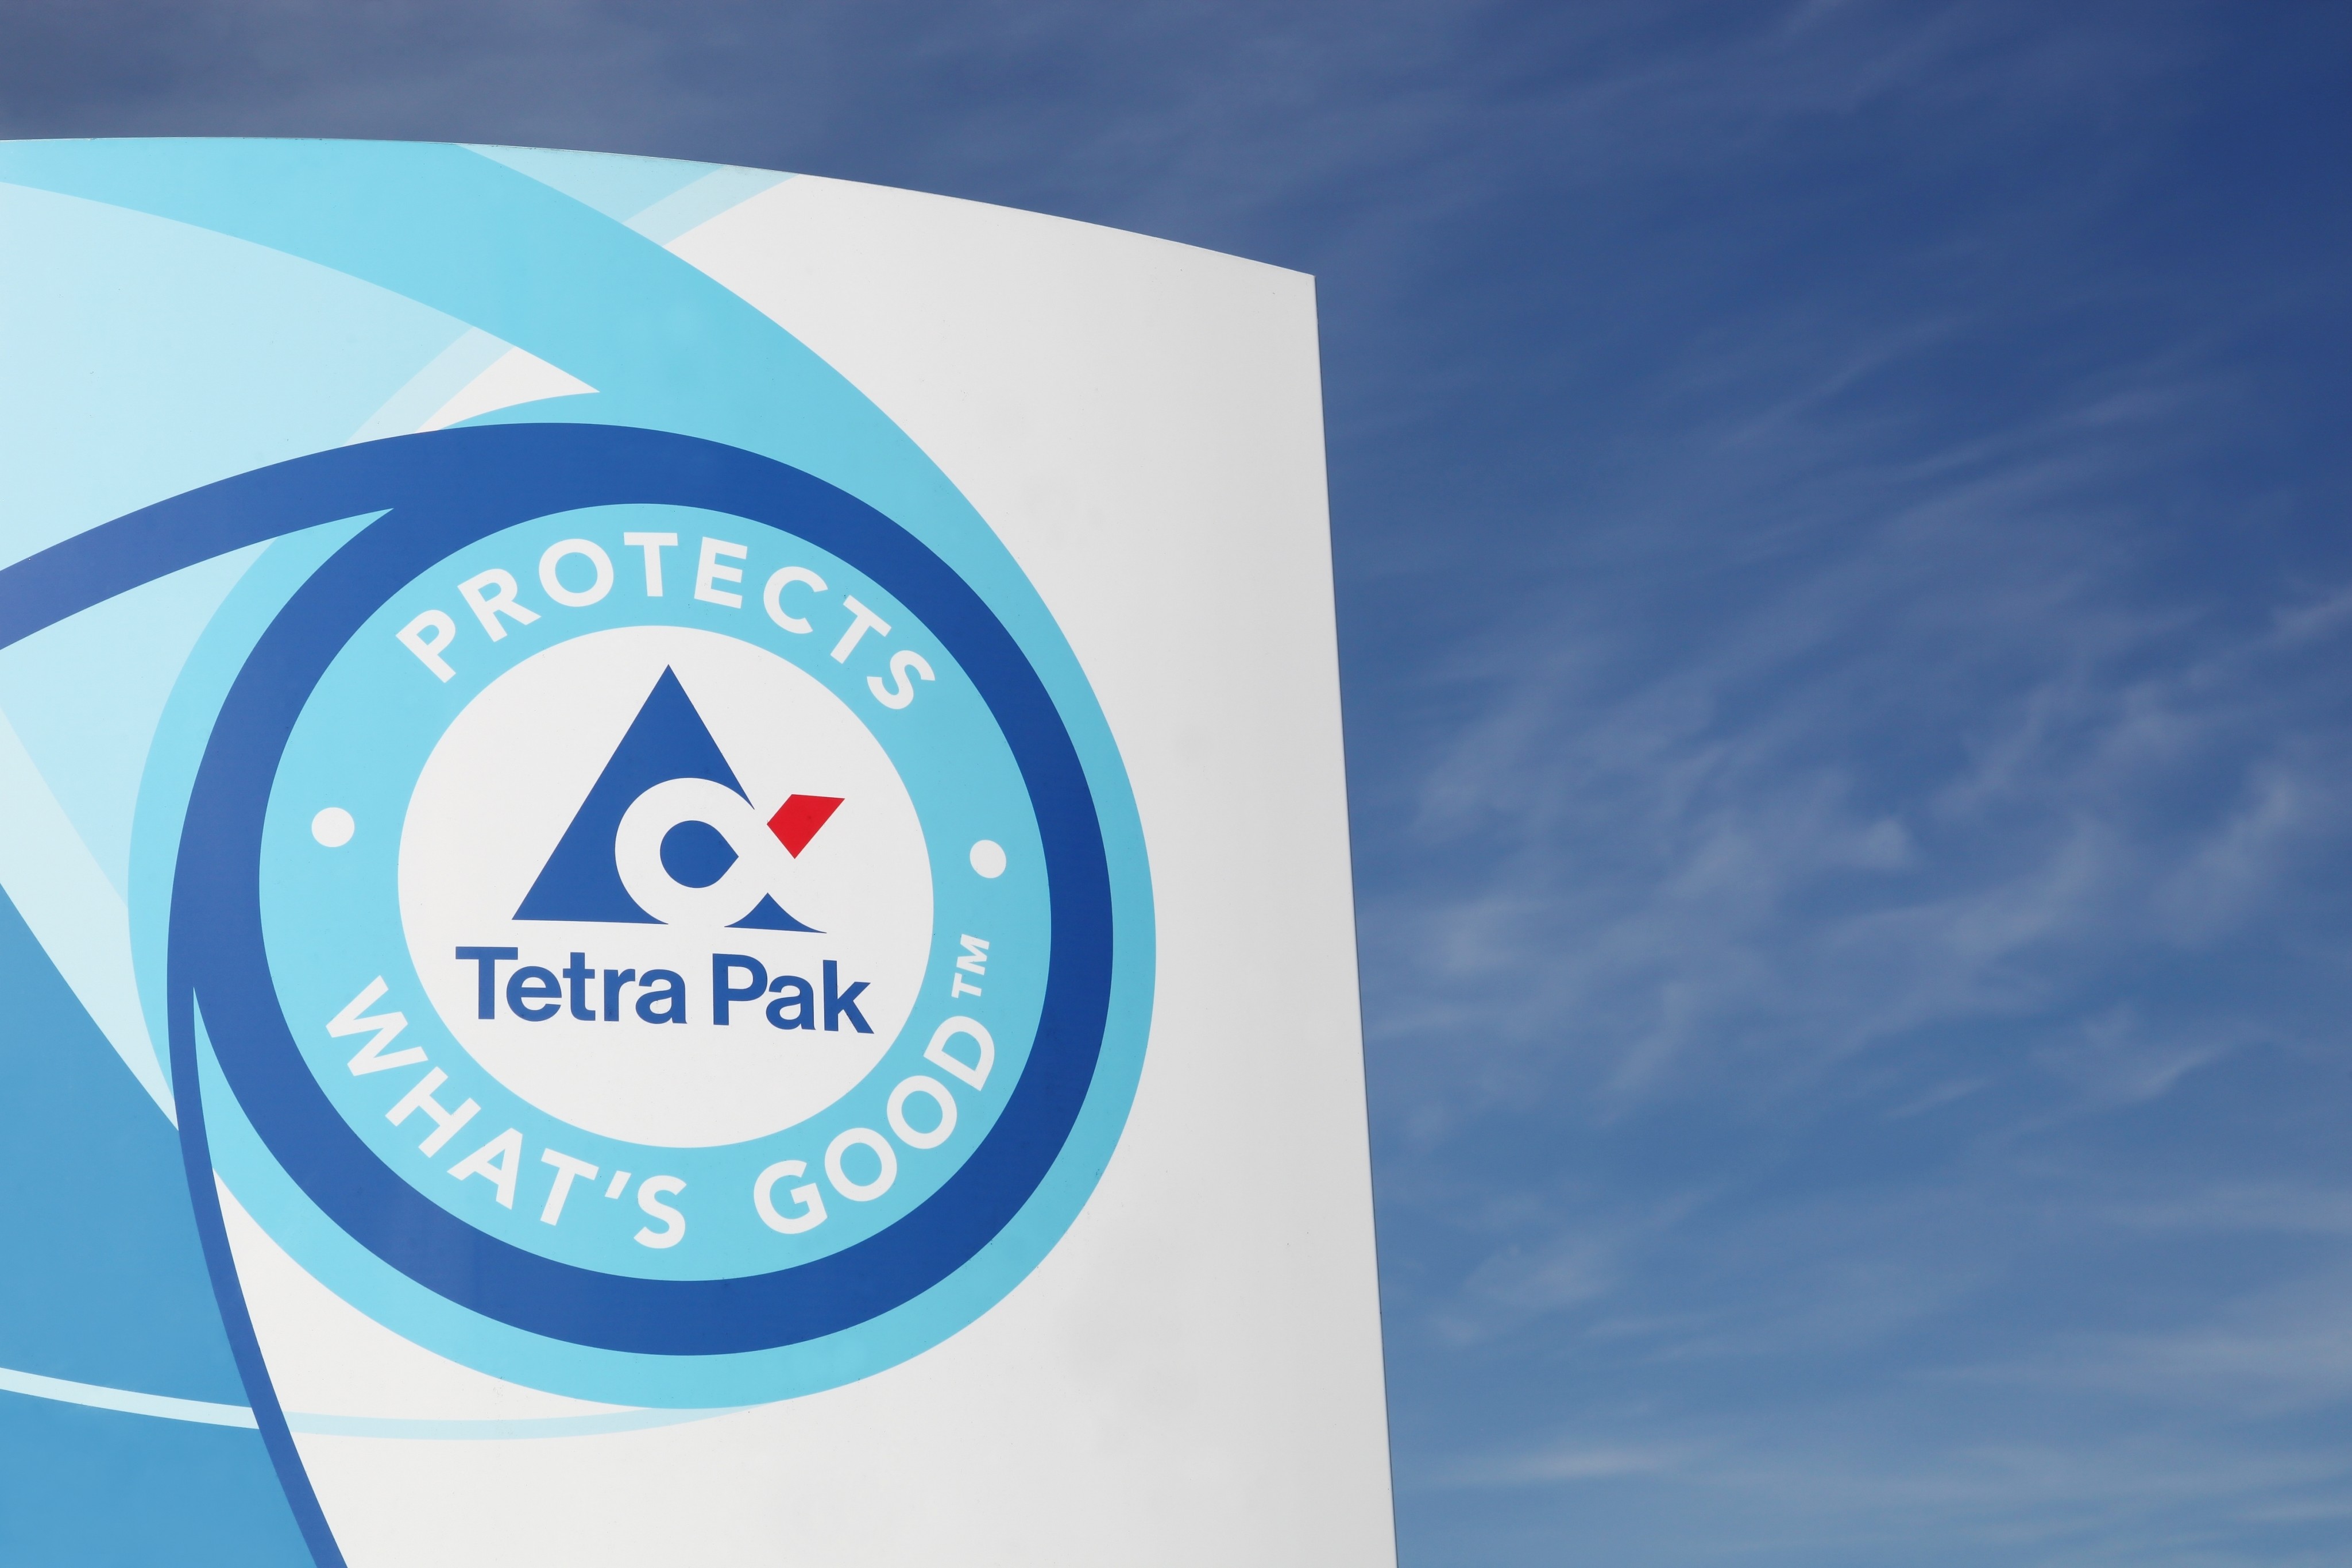 Tetra Pak is a multinational food packaging and processing company of Swedish origin with headquarters in Switzerland. Photo: Shutterstock